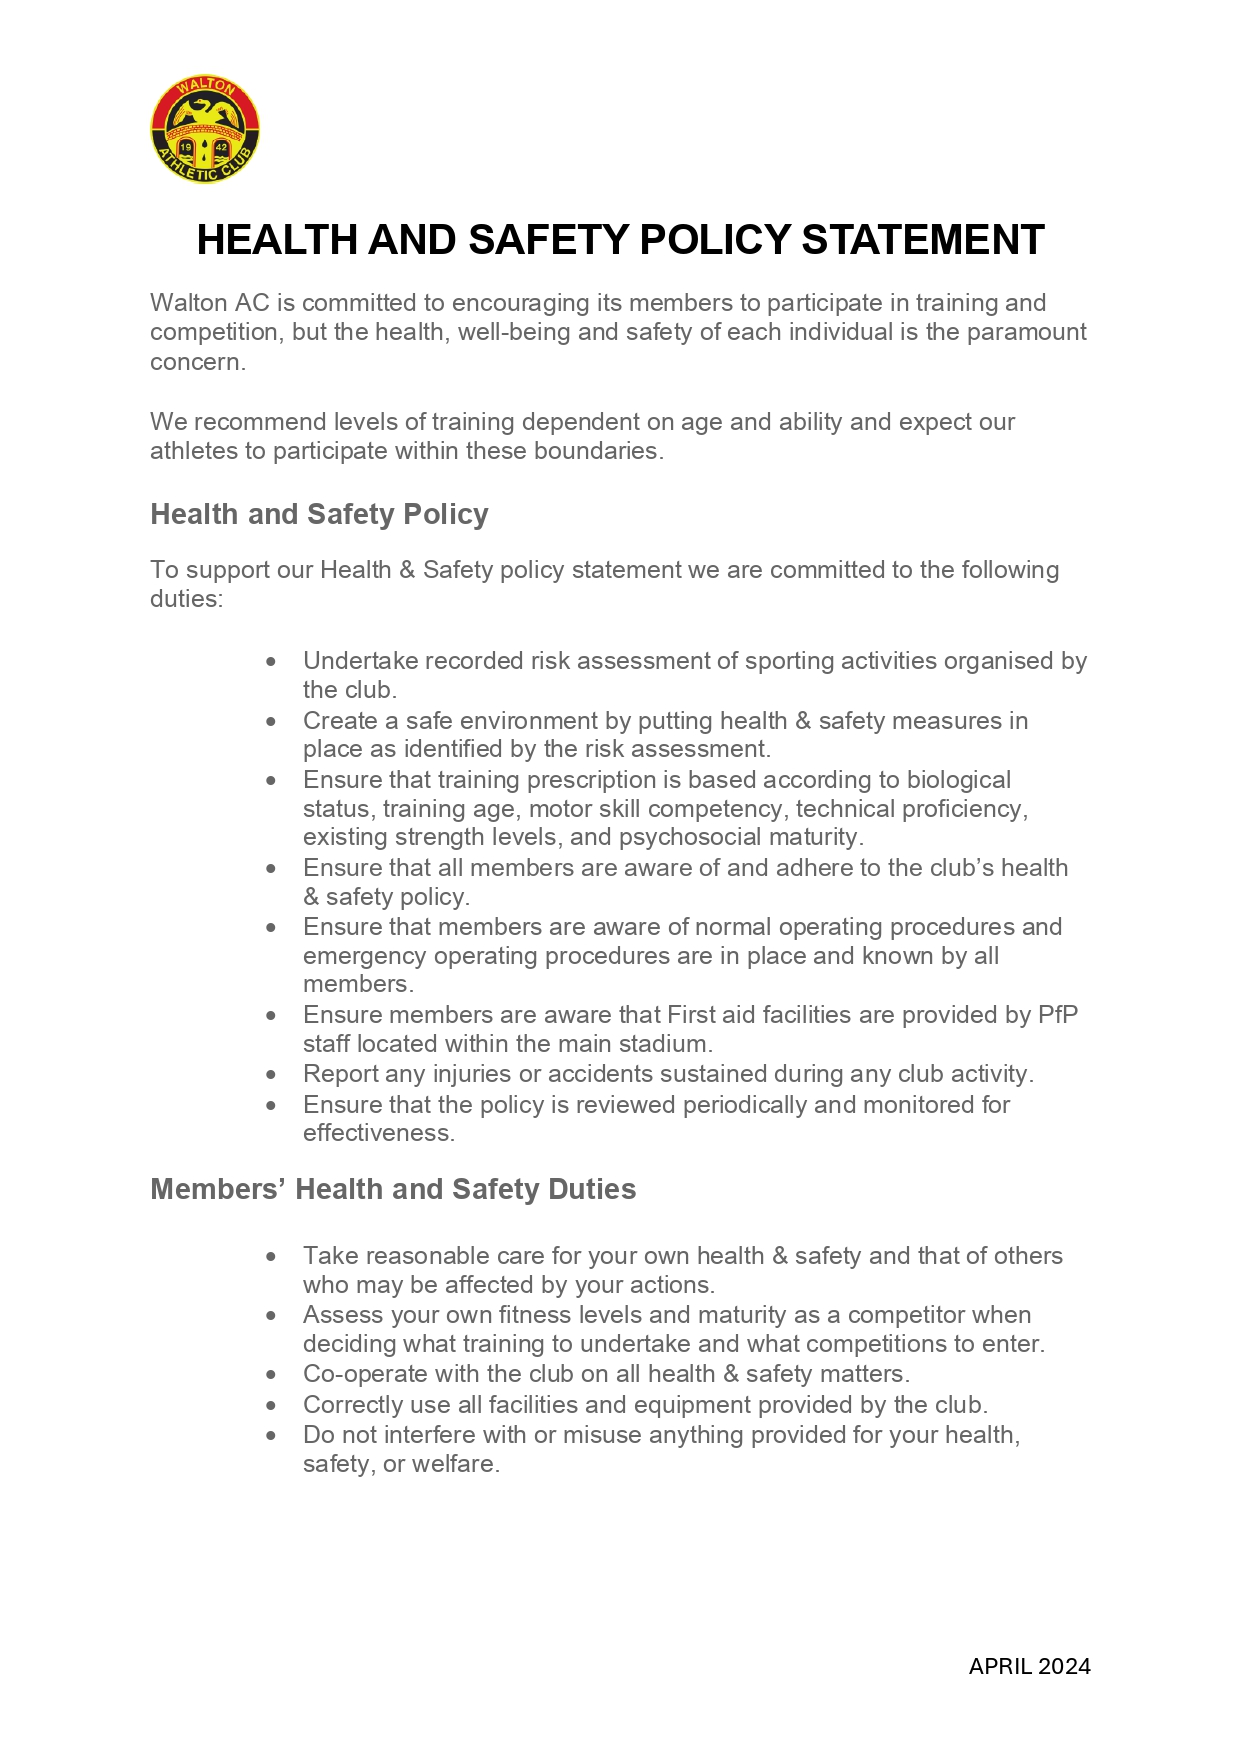 Front cover of a health and safety policy